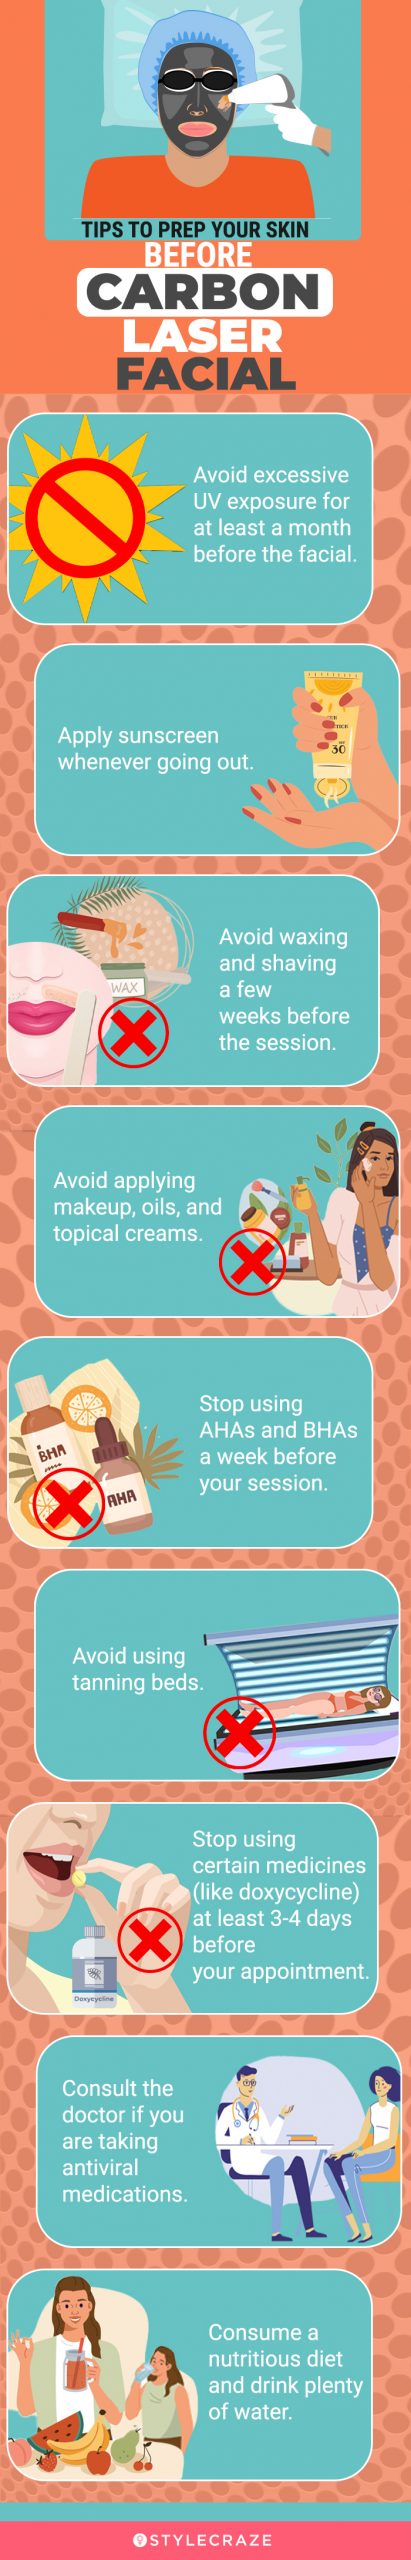 tips to prep your skin before carbon laser facial (infographic)